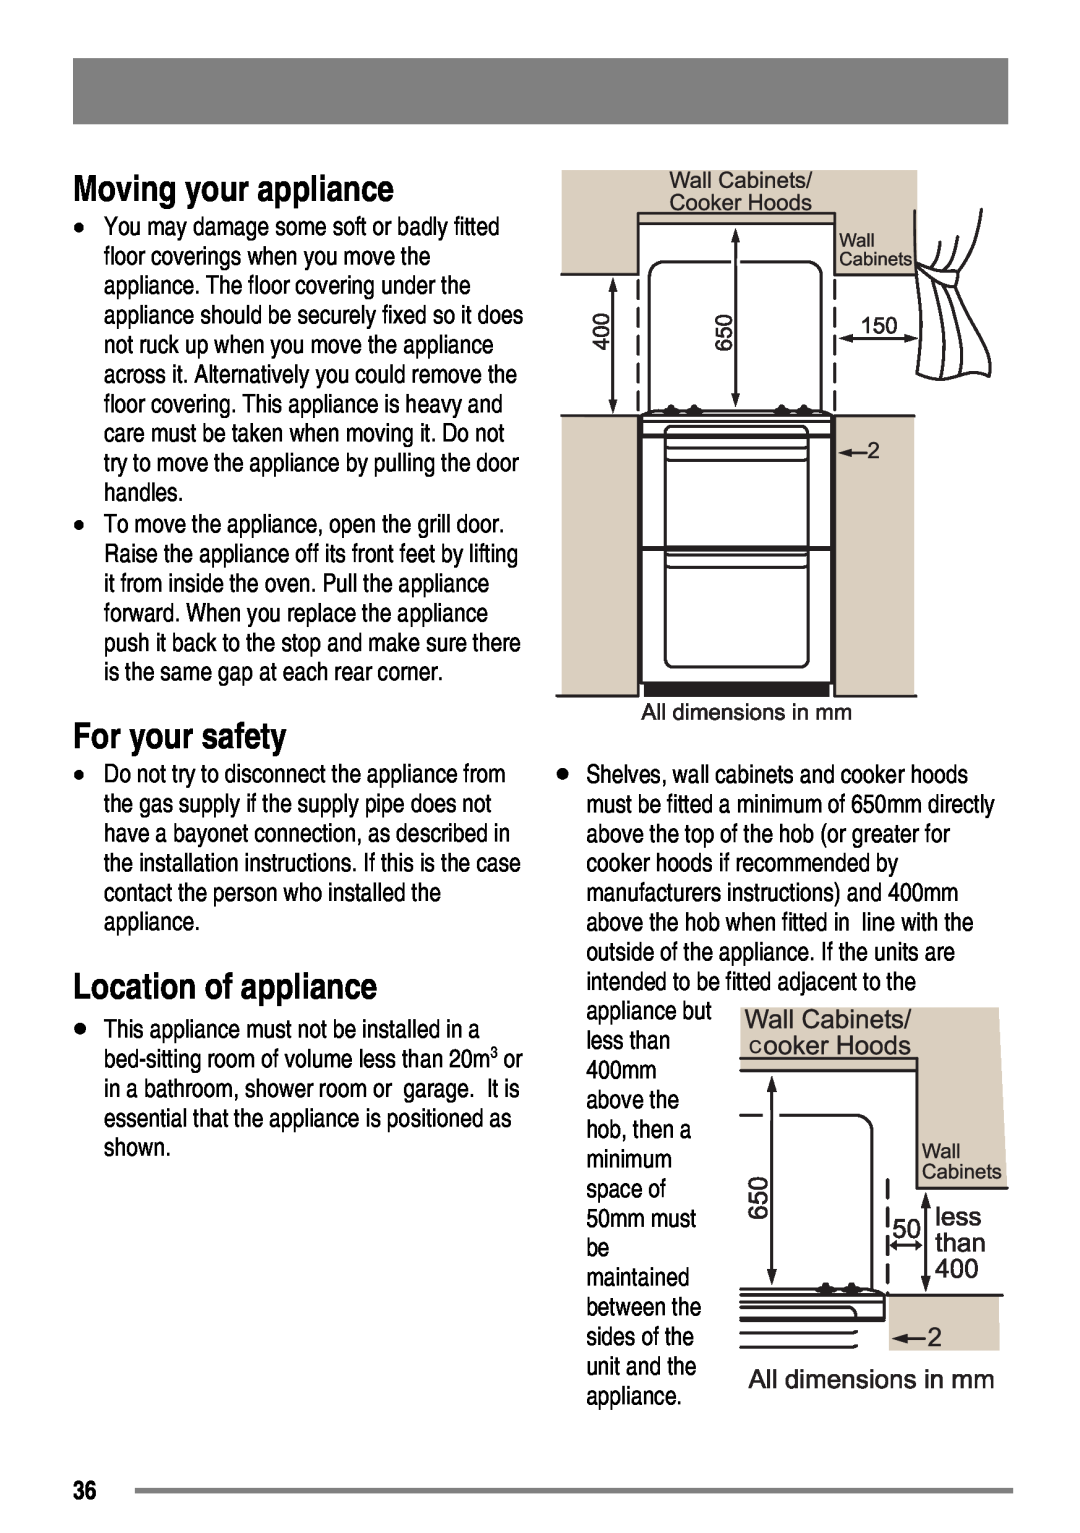 Zanussi FH10 user manual Moving your appliance, For your safety, Location of appliance, above the 